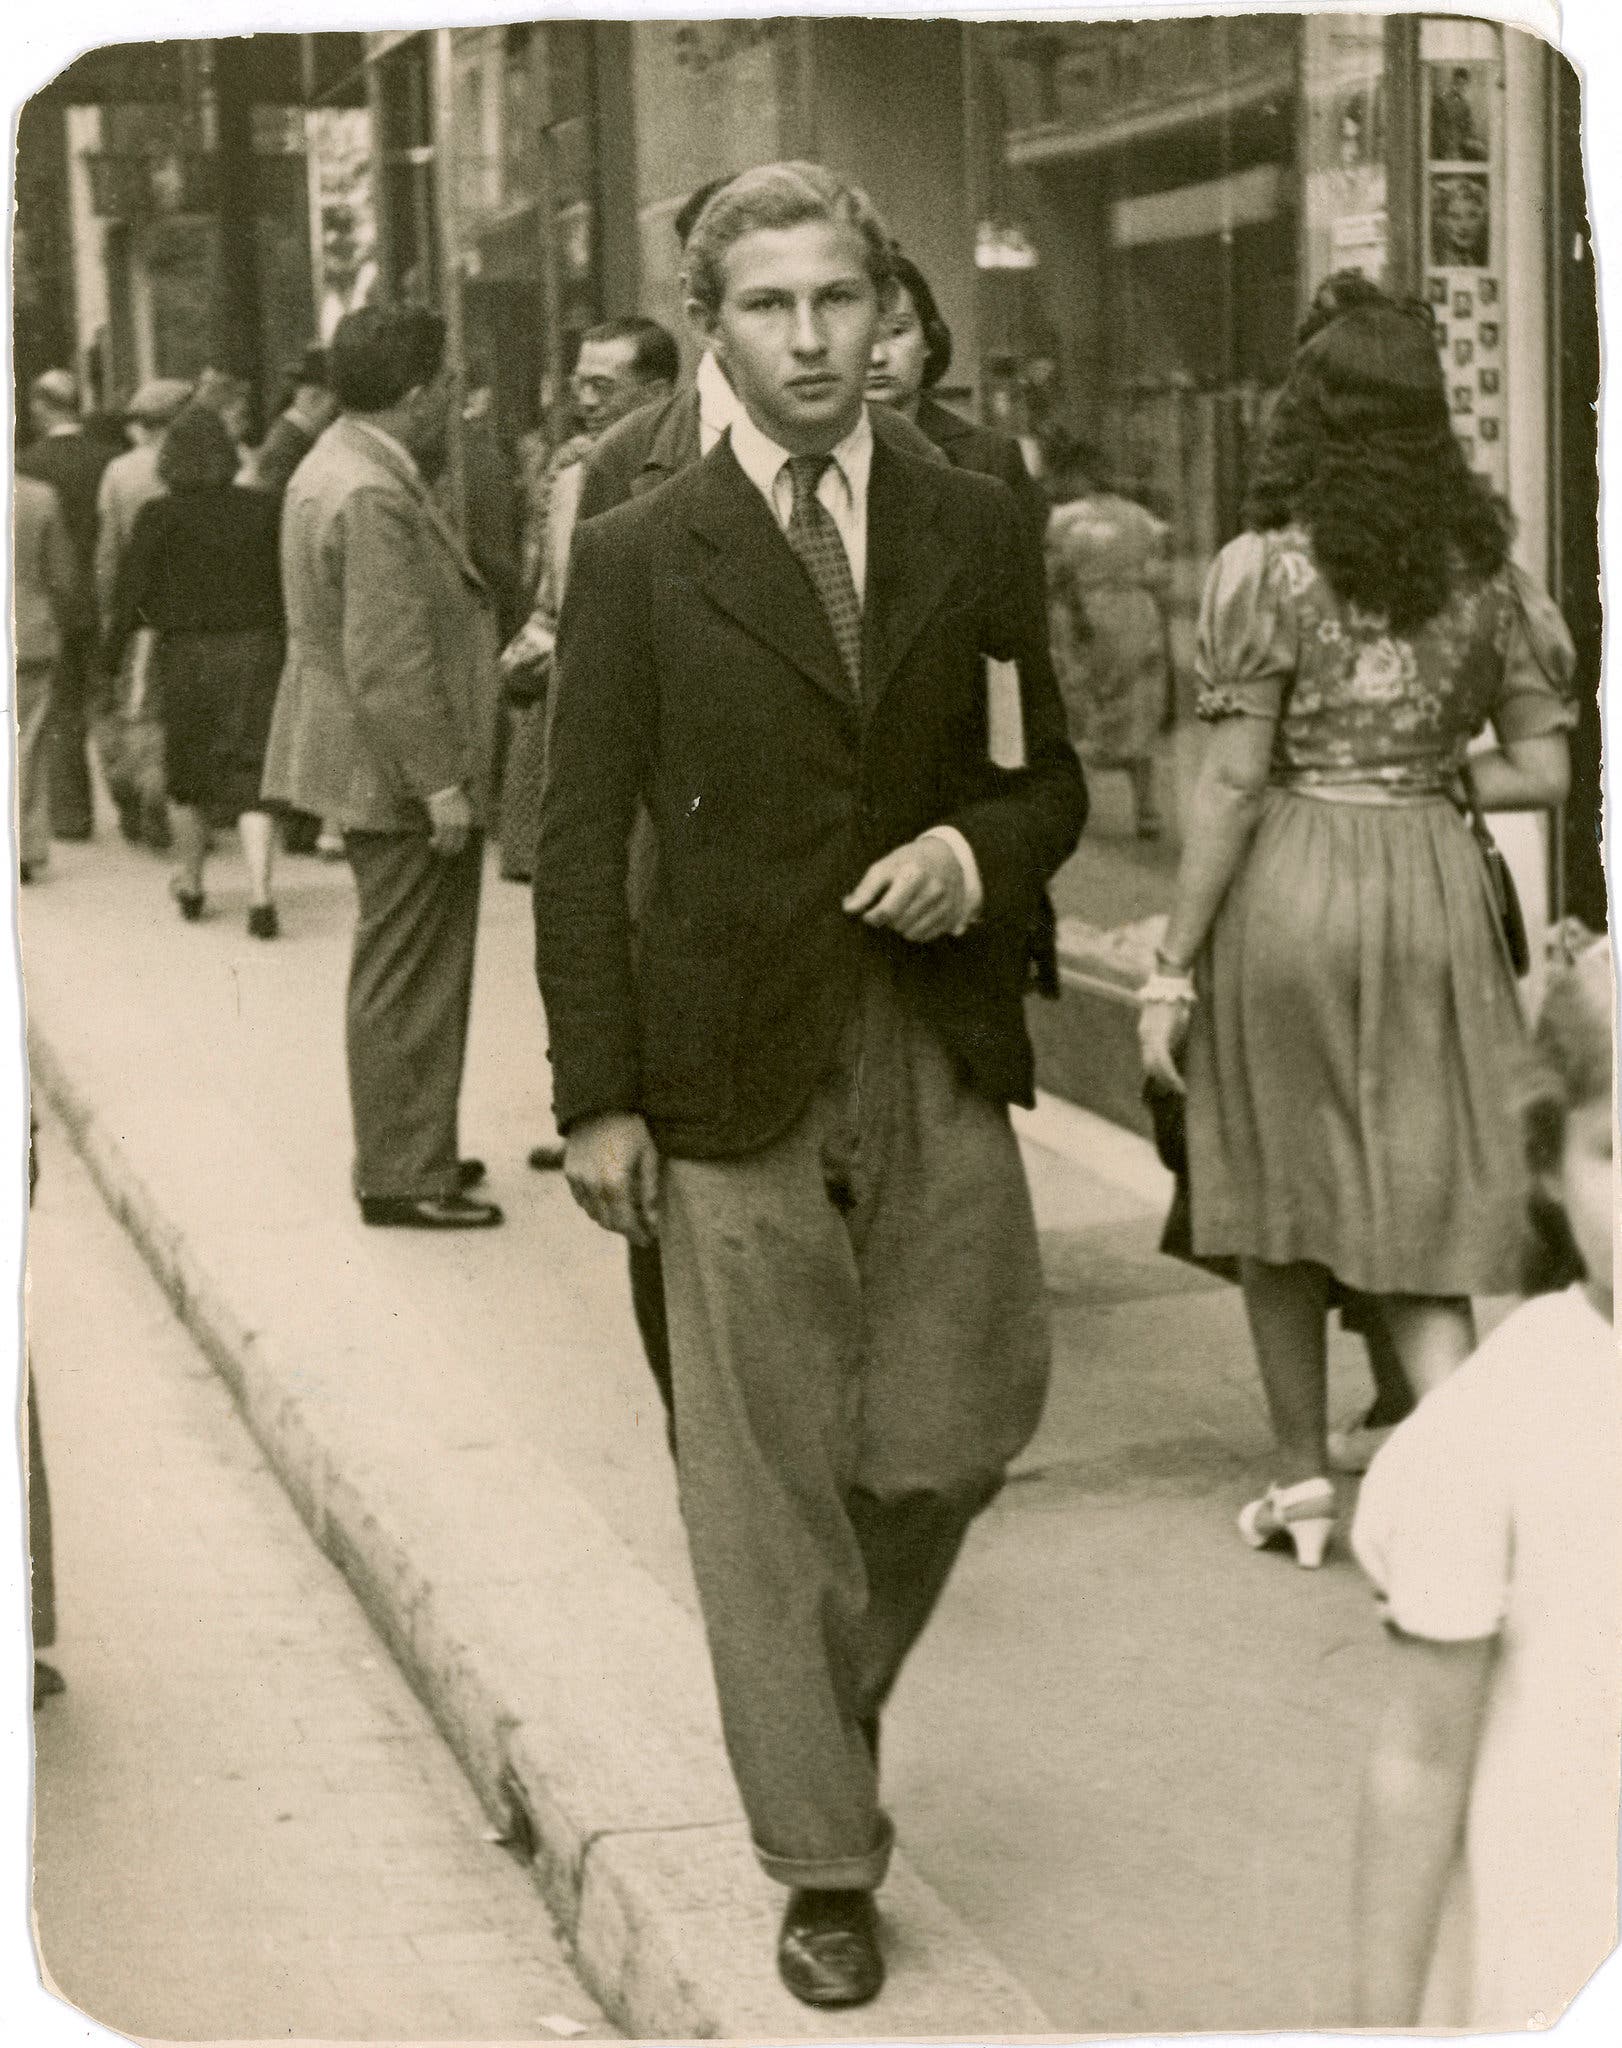 Rosenberg, pictured in 1941 in Marseilles, carried illegal documents and coordinated smuggling efforts with mobsters. Photo credit: Justus Rosenberg.